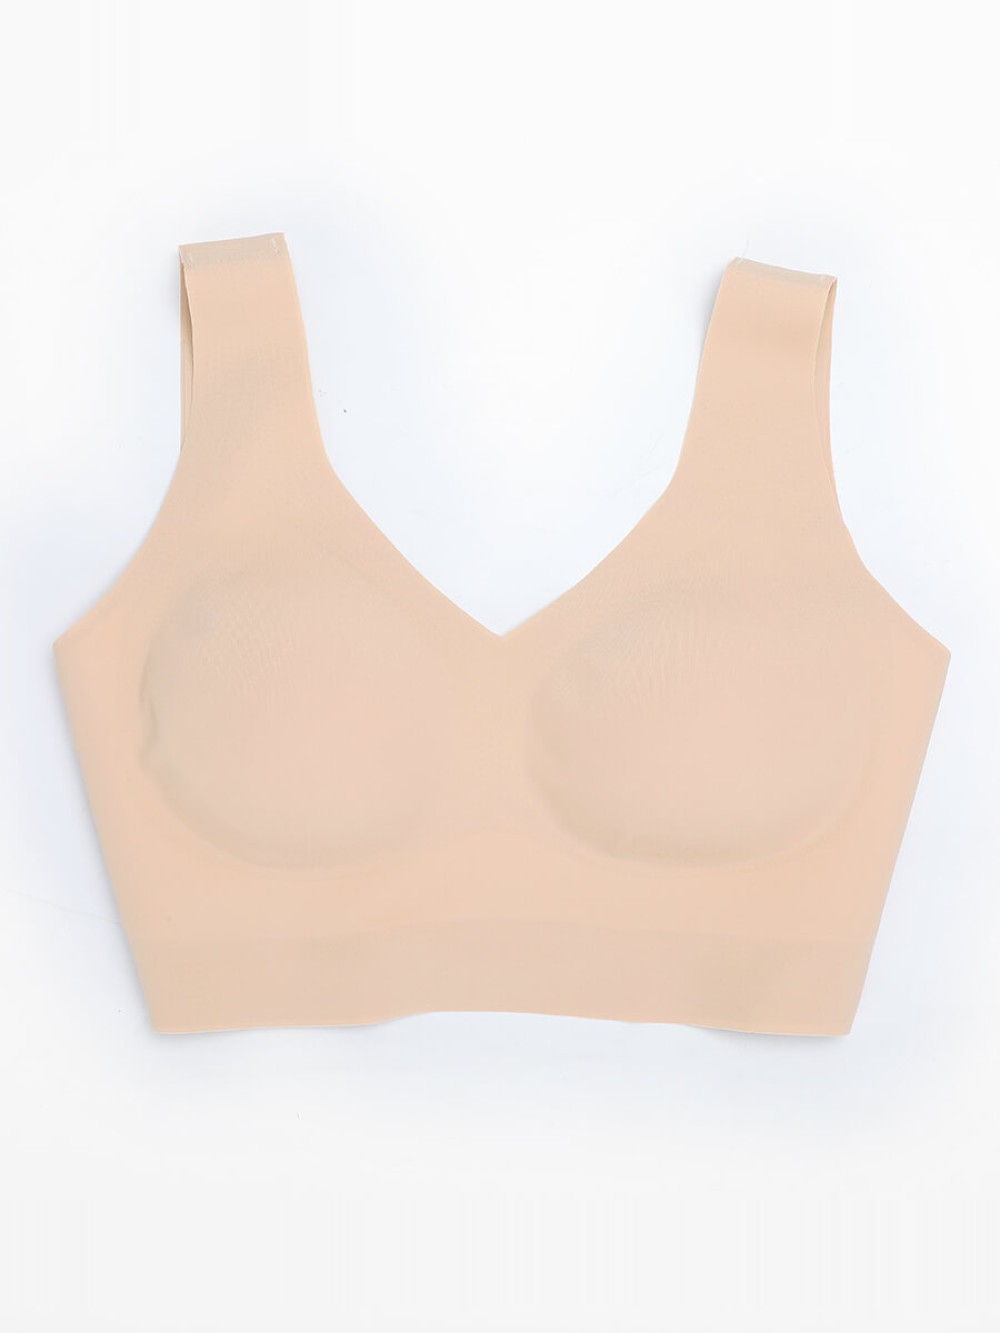 Fitted V-Neck Seamless Bra Tank Top